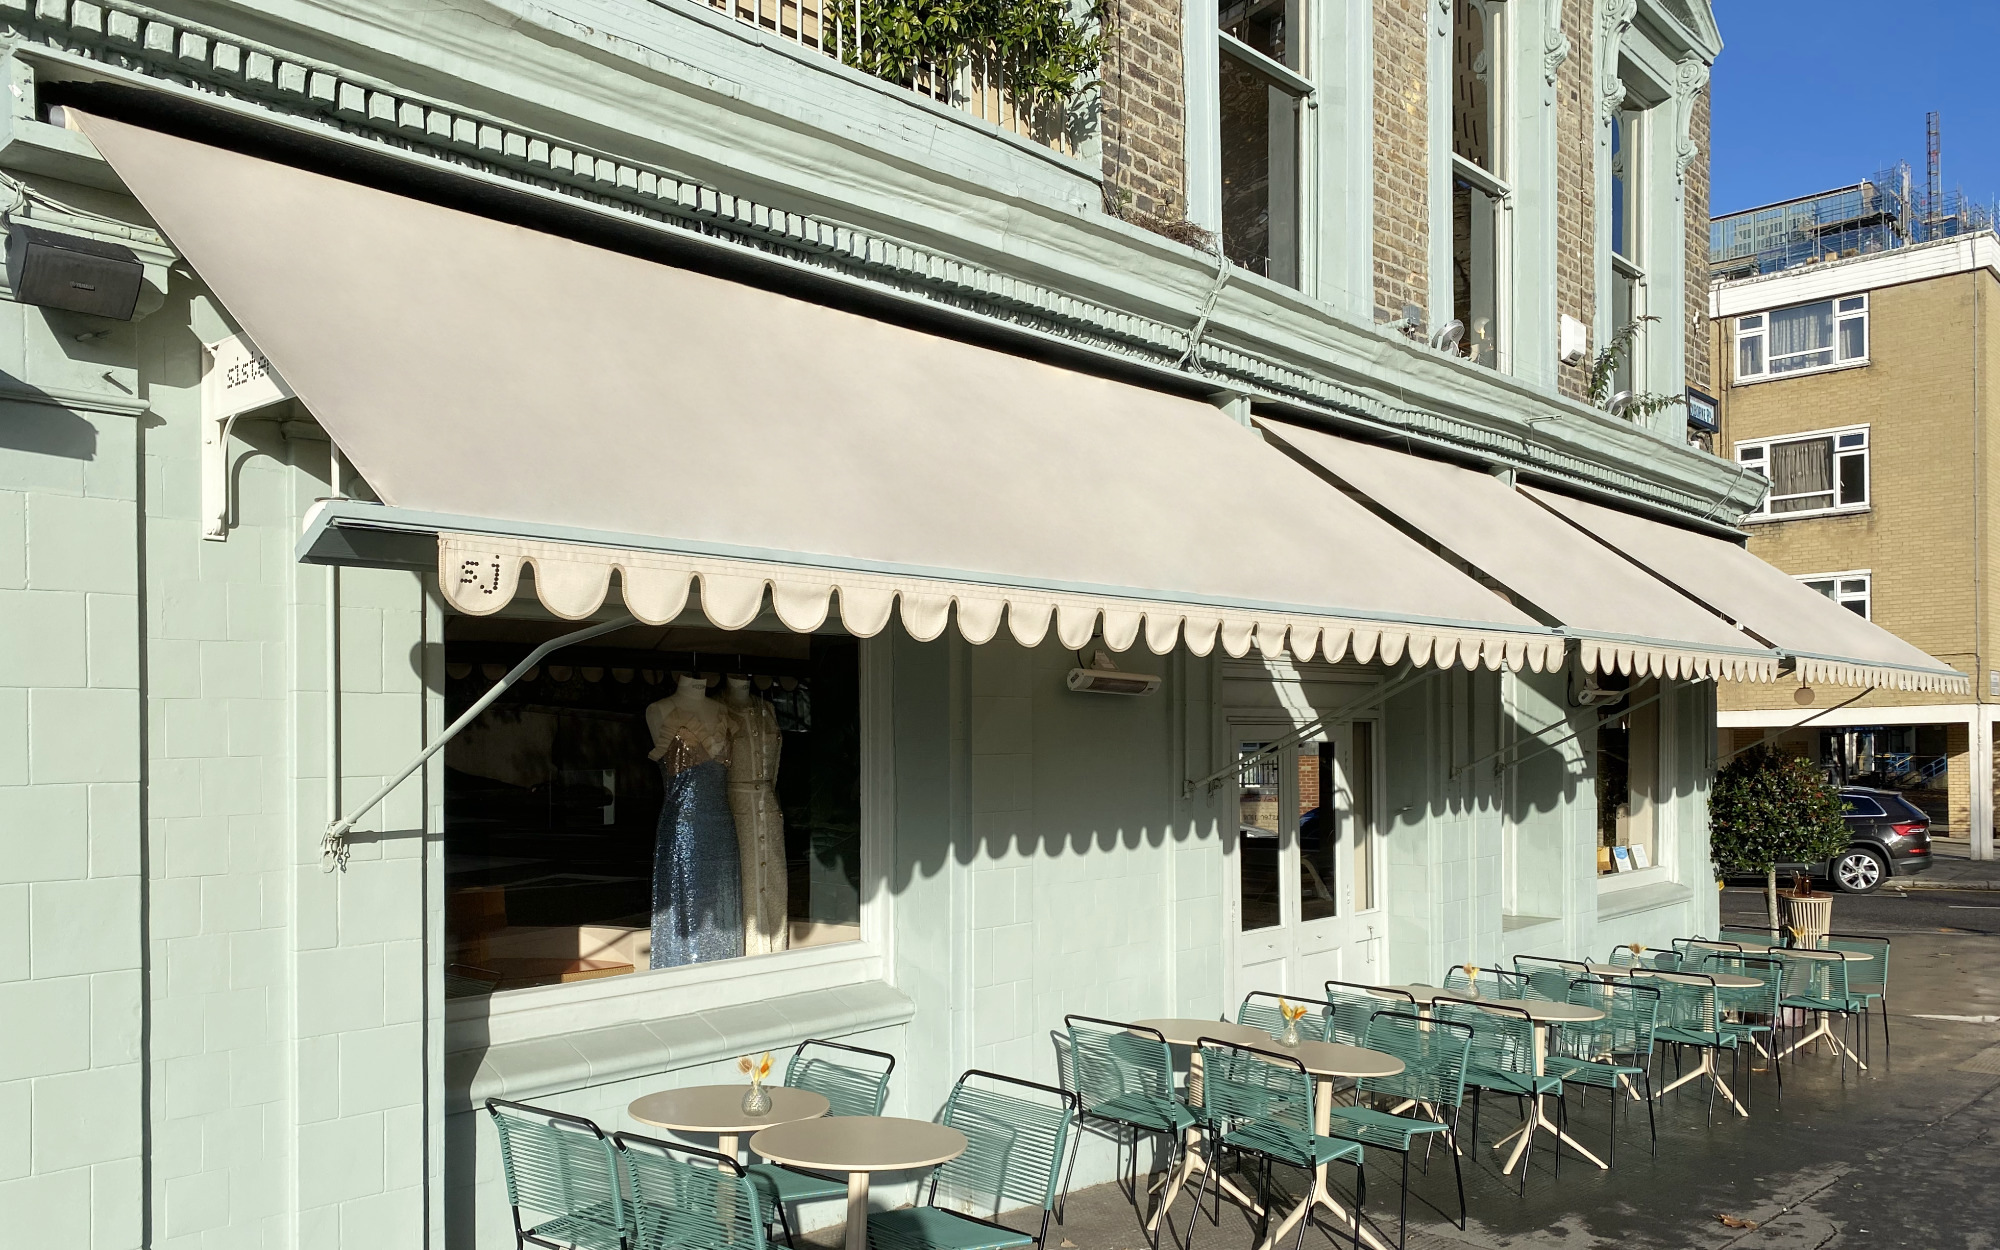 Commercial Awning refurbishment